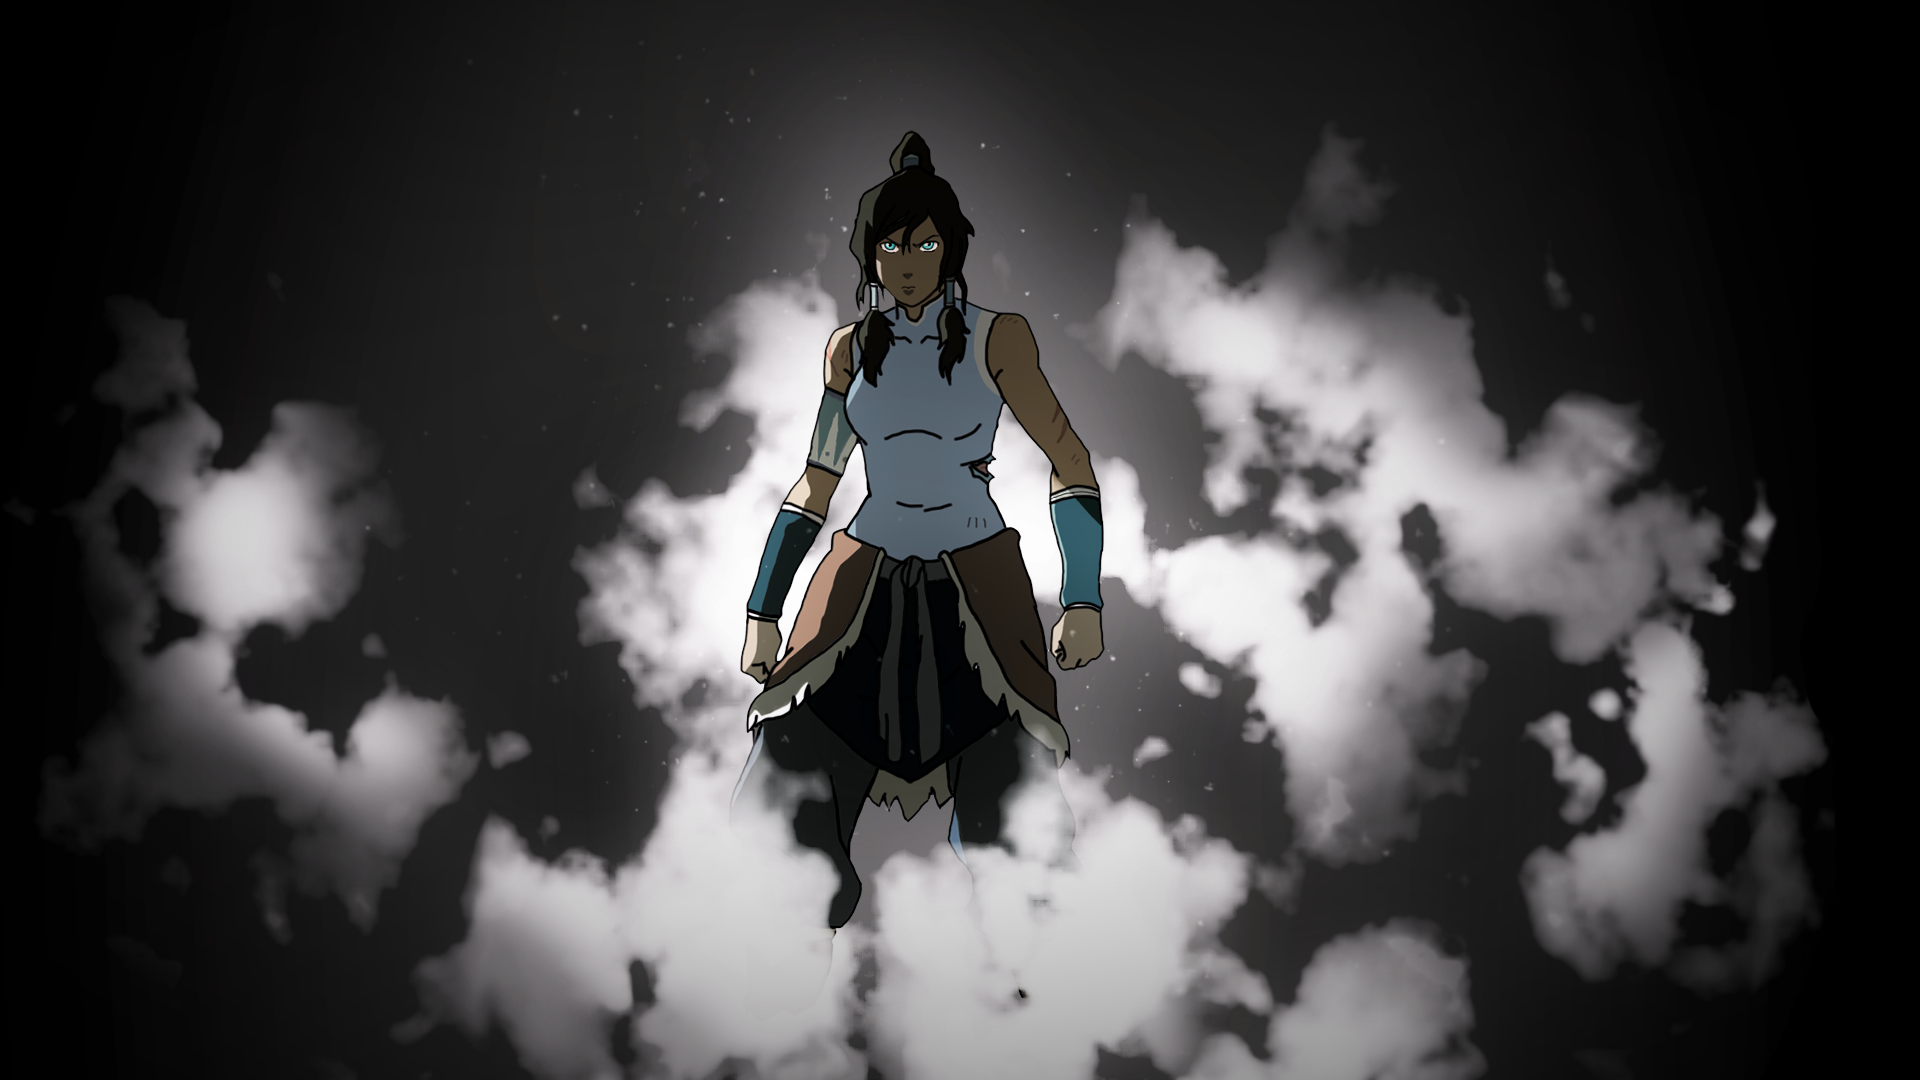 the legend of korra wallpaper,sky,darkness,black and white,photography,anime